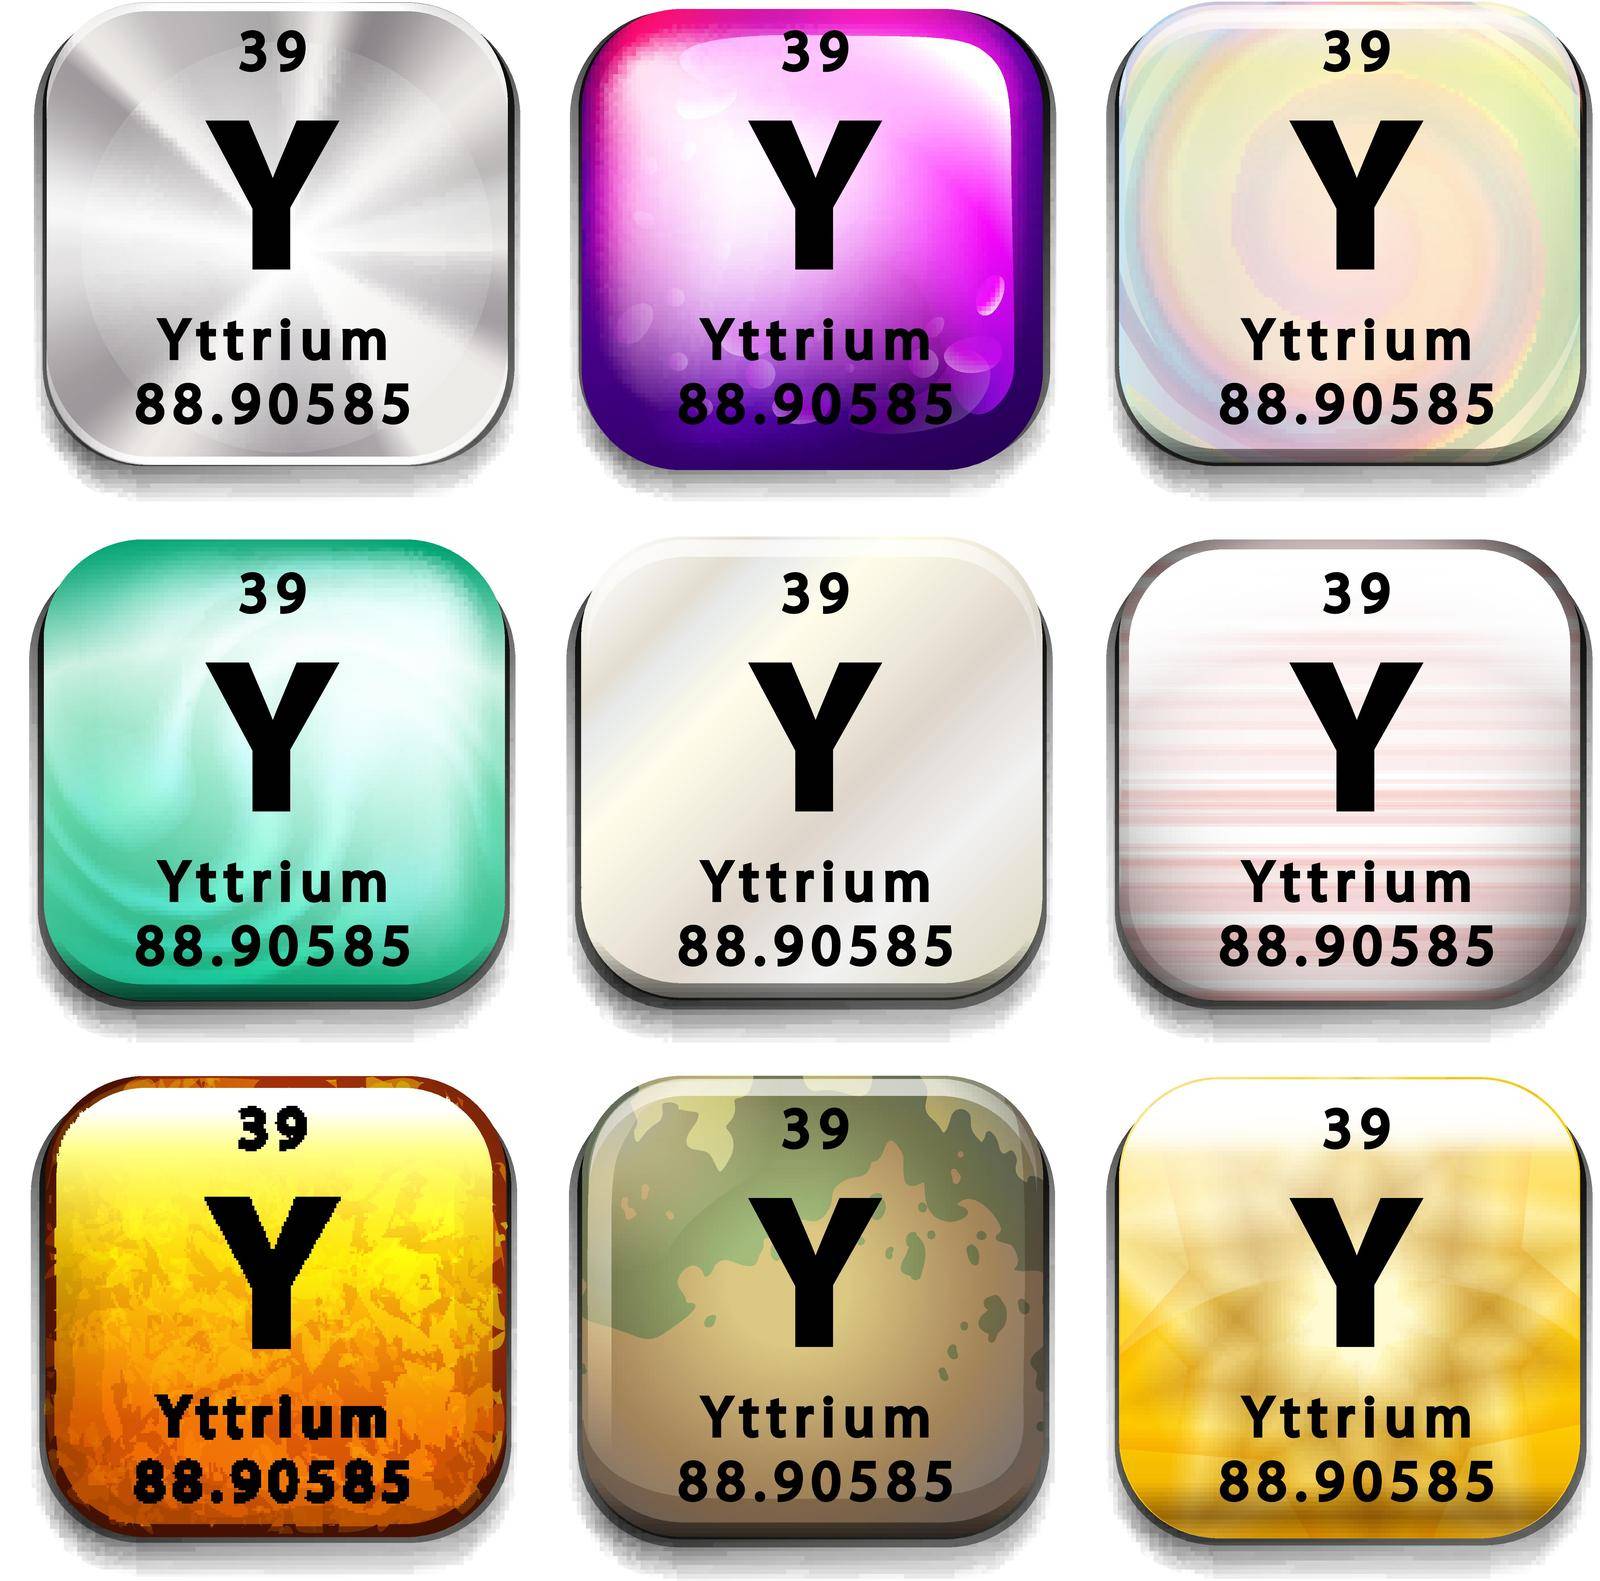 A periodic table showing the Yttrium on a white background